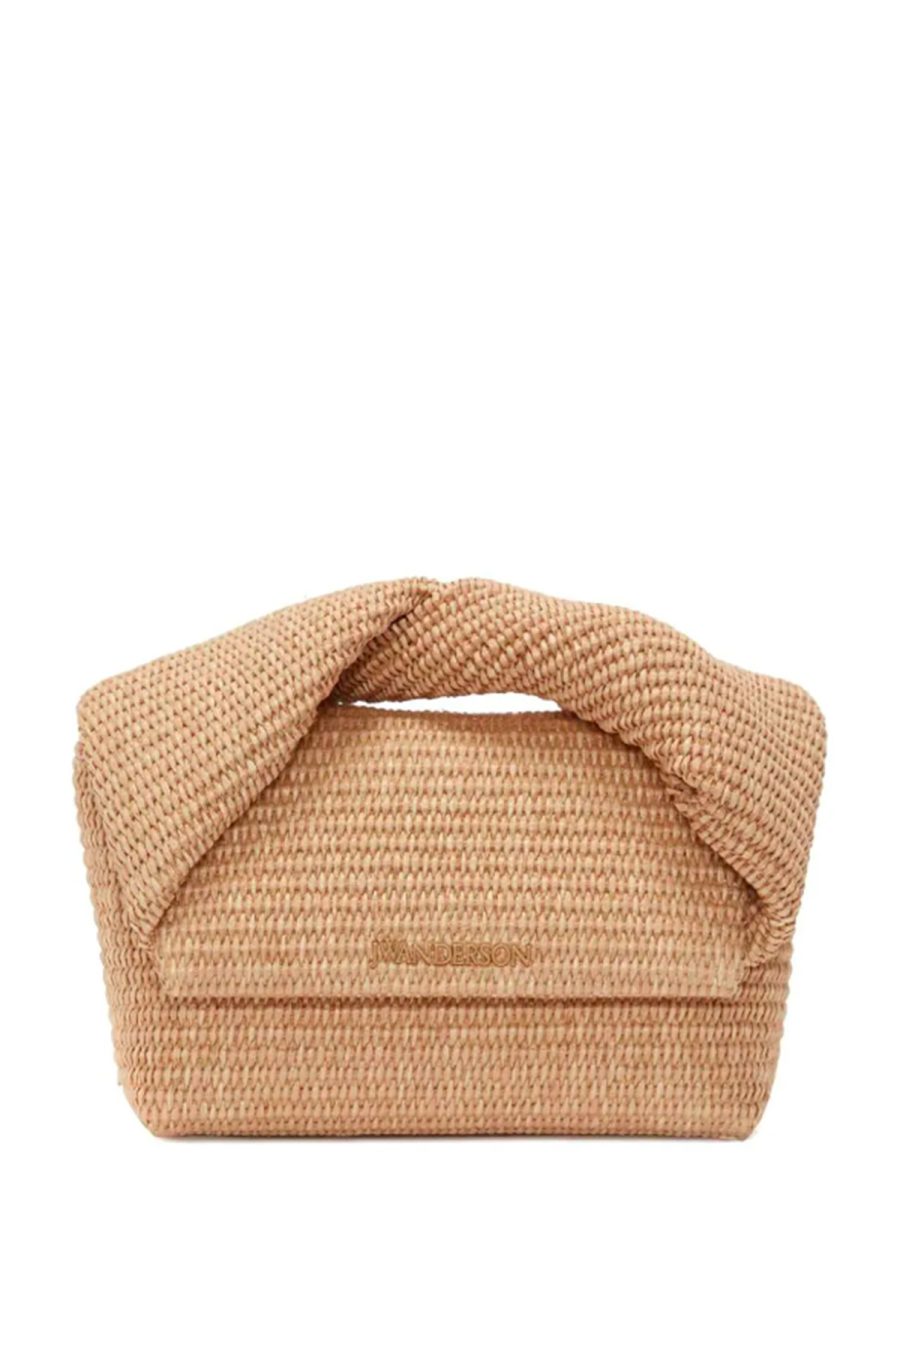 JW ANDERSON Bags.. Natural